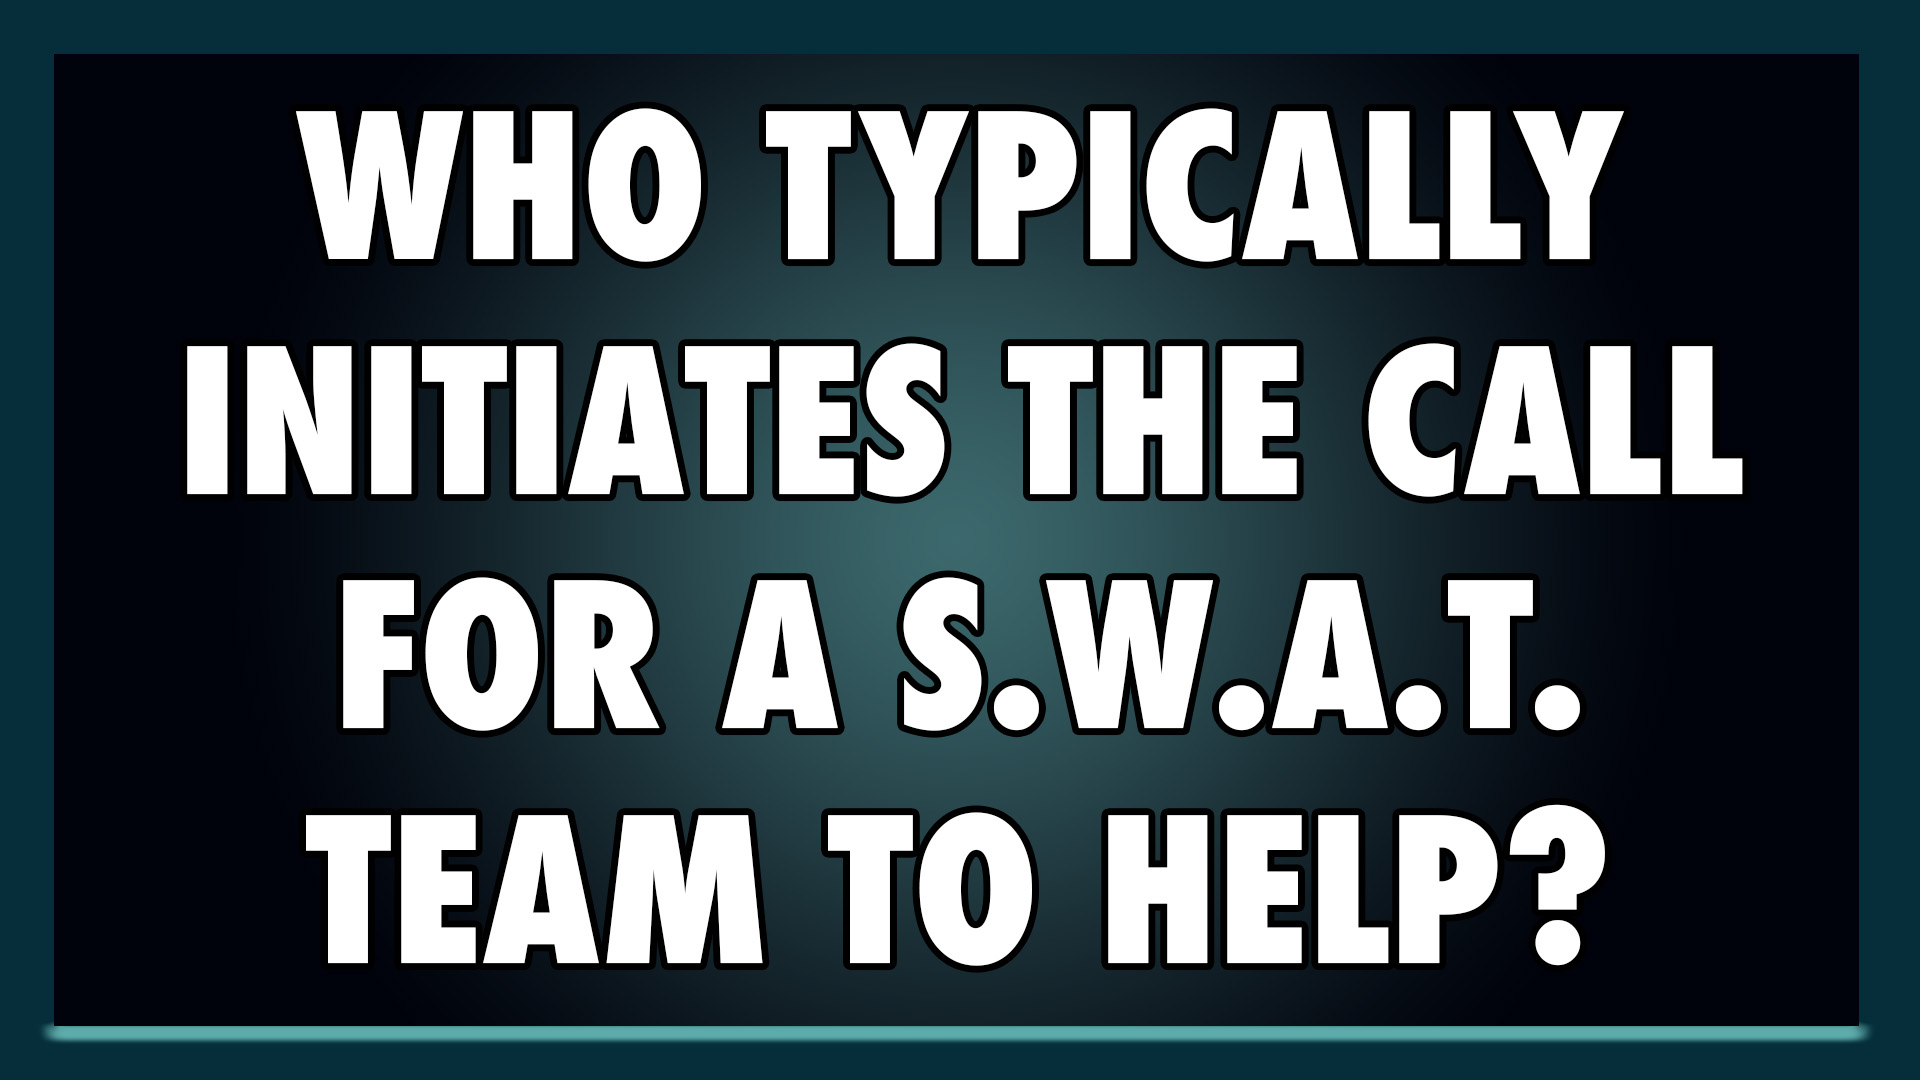 Who typically initiates the call for a S.W.A.T. team to help?